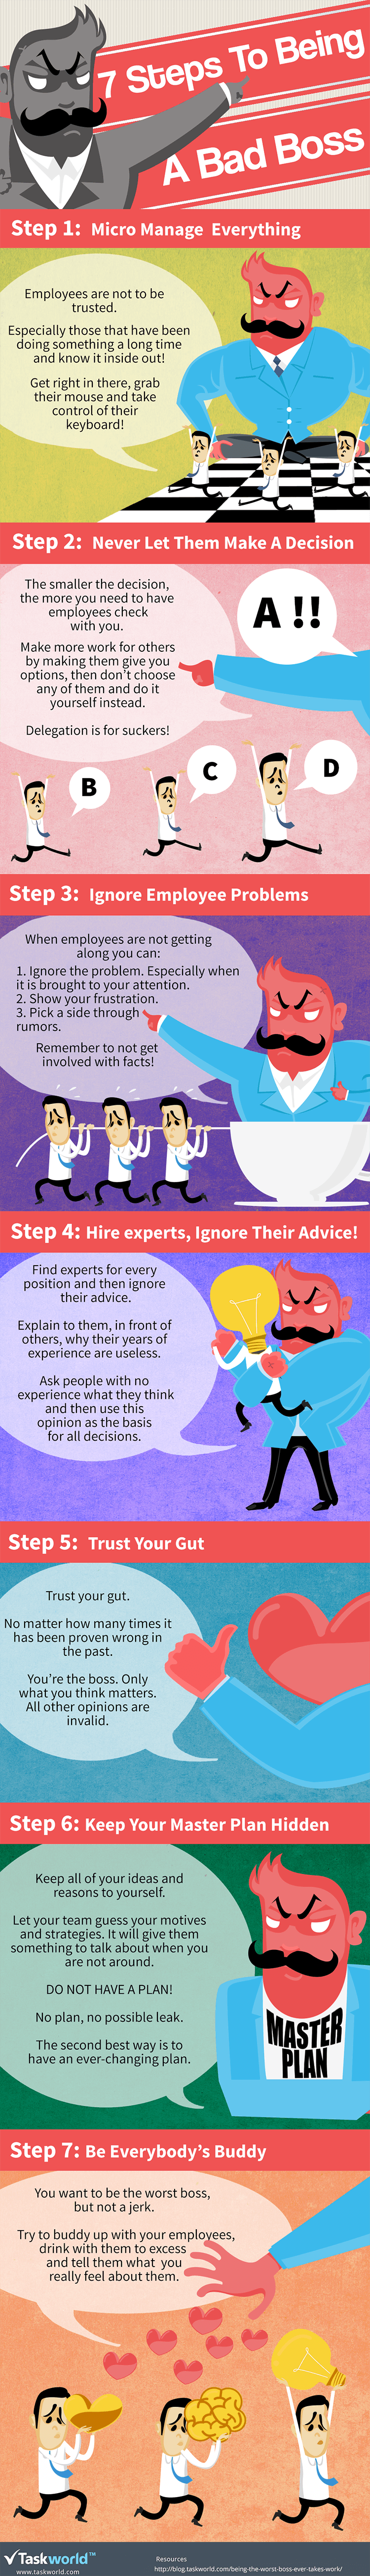 7 Steps to Being a Bad Boss